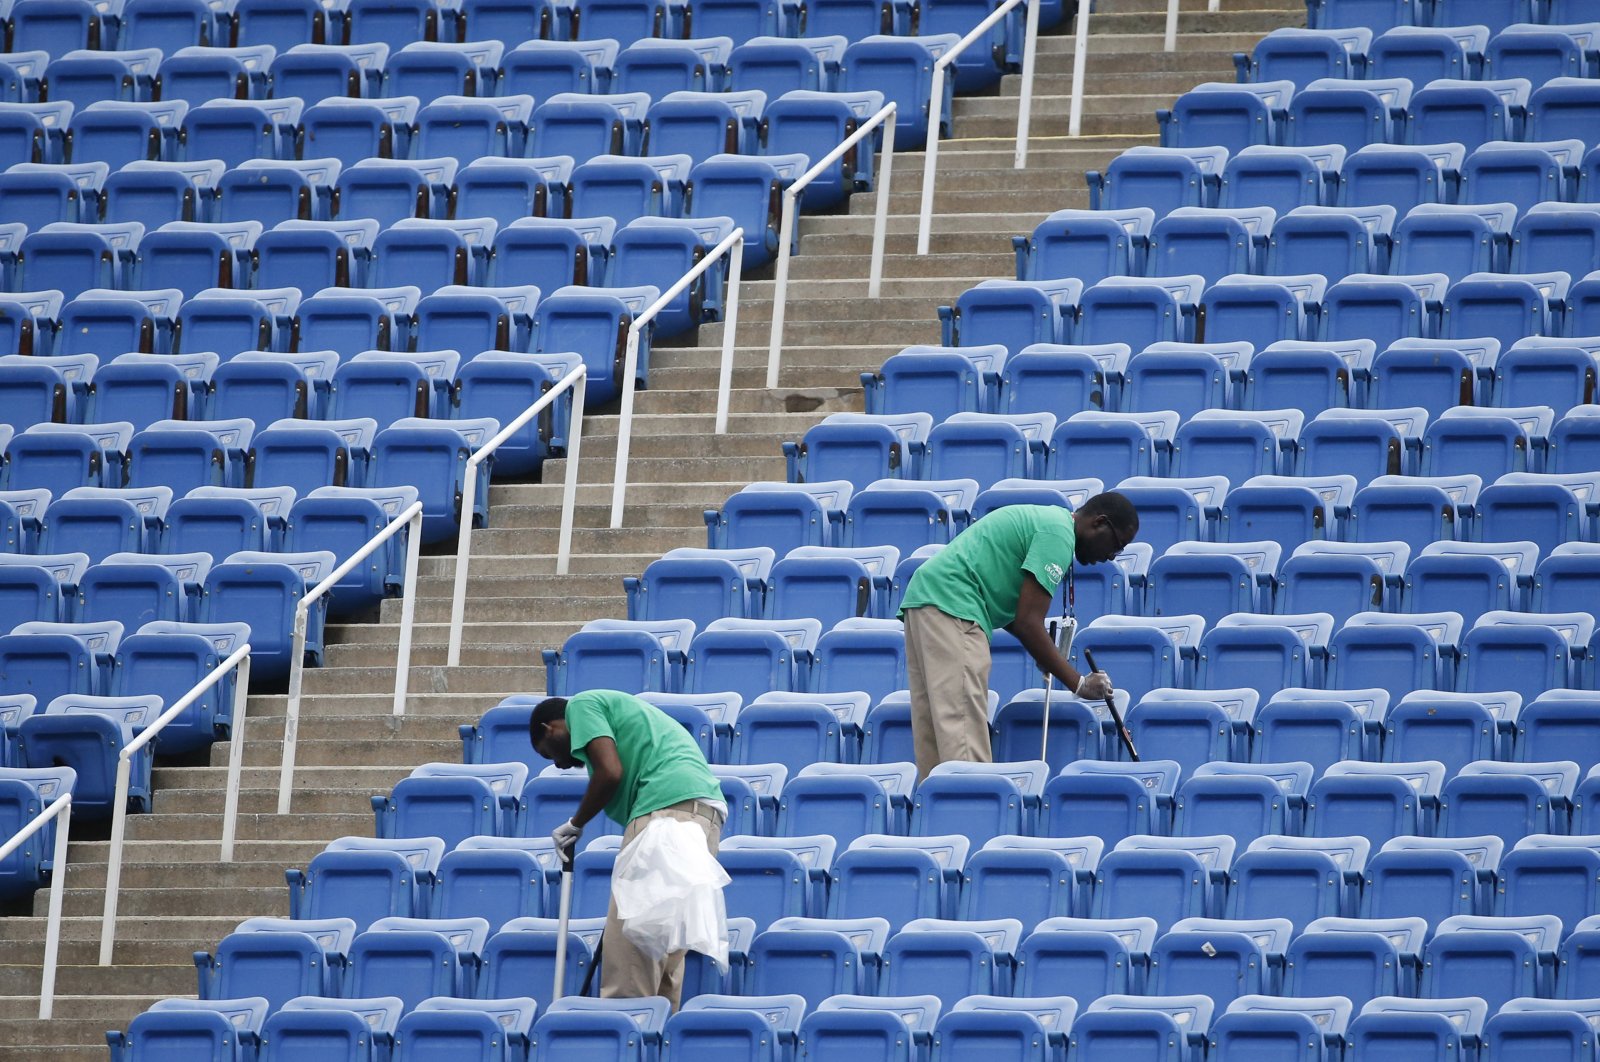 Workers clean the empty stands in Arthur Ashe Stadium after the women's semifinal matches were postponed because of rain at the U.S. Open tennis tournament in New York, U.S., Sept. 10, 2015. (AP Photo) 